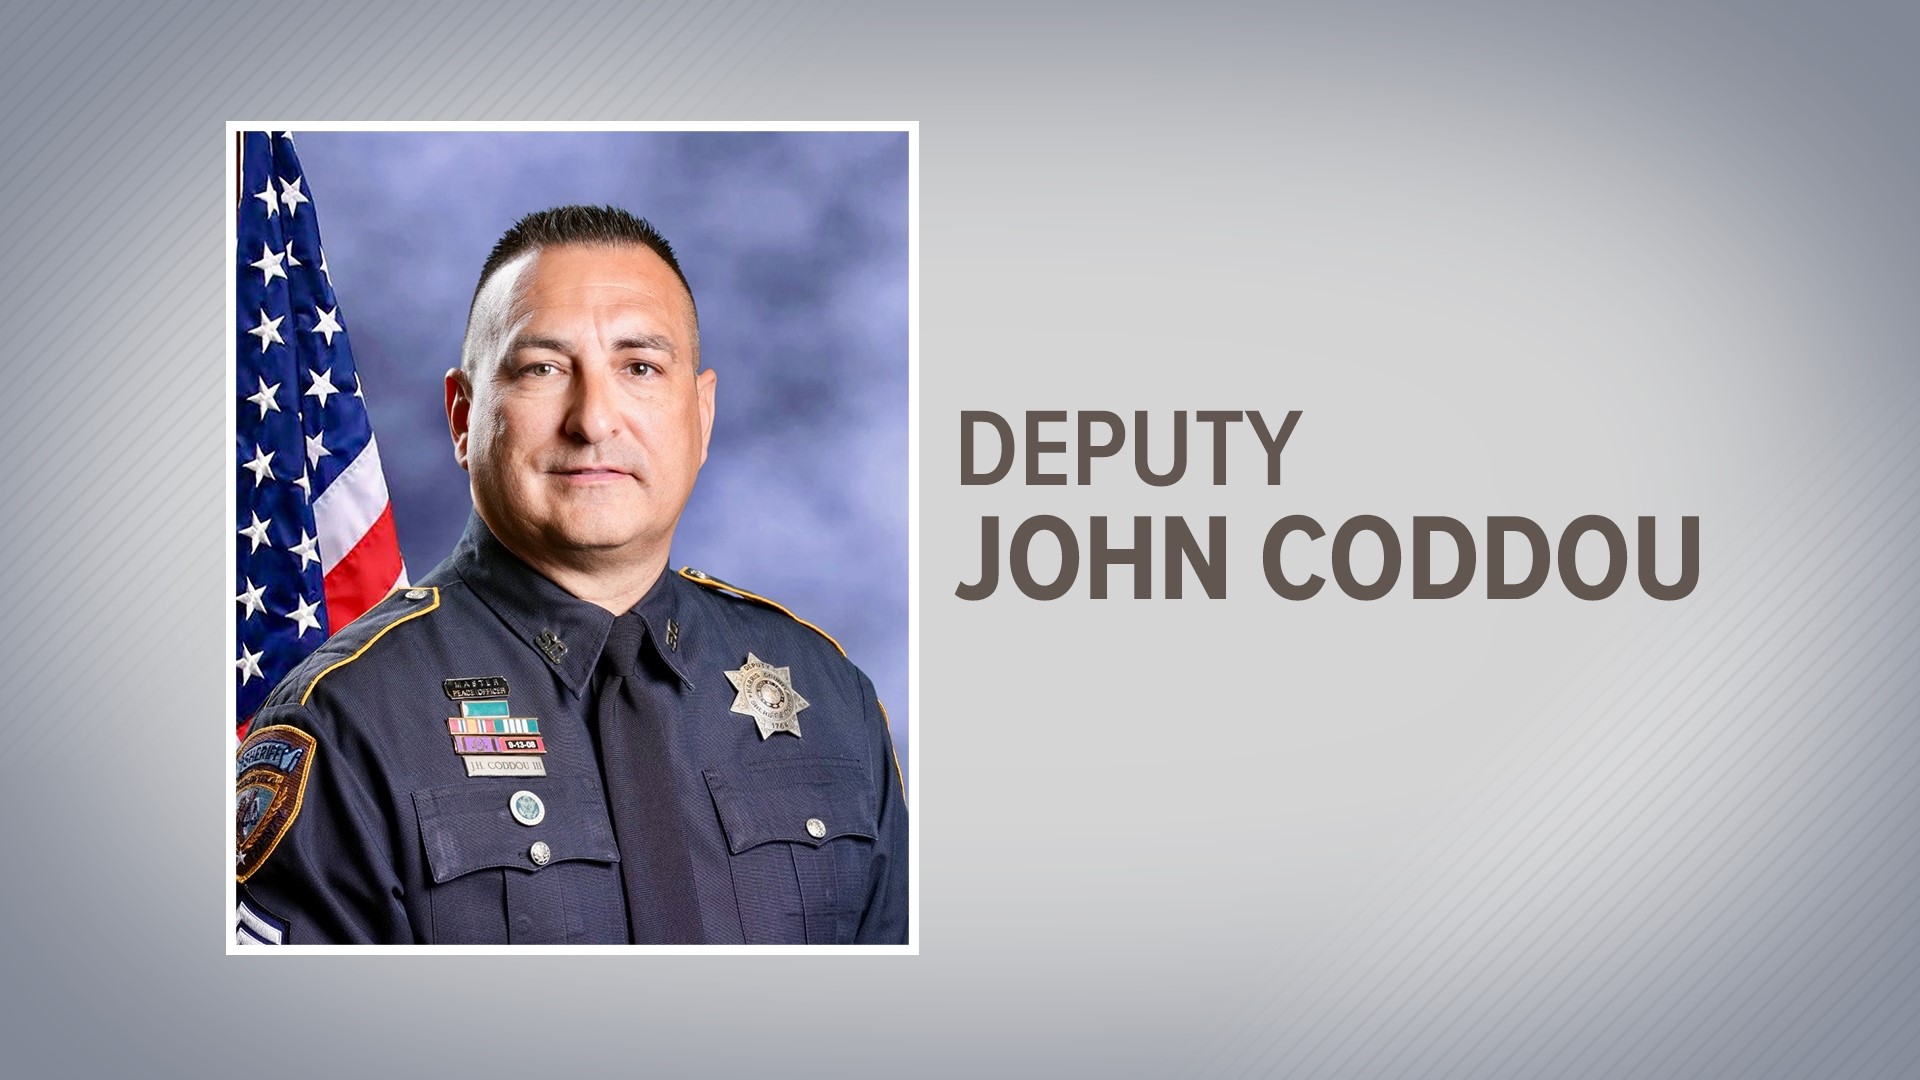 John Coddou will be laid to rest next week.